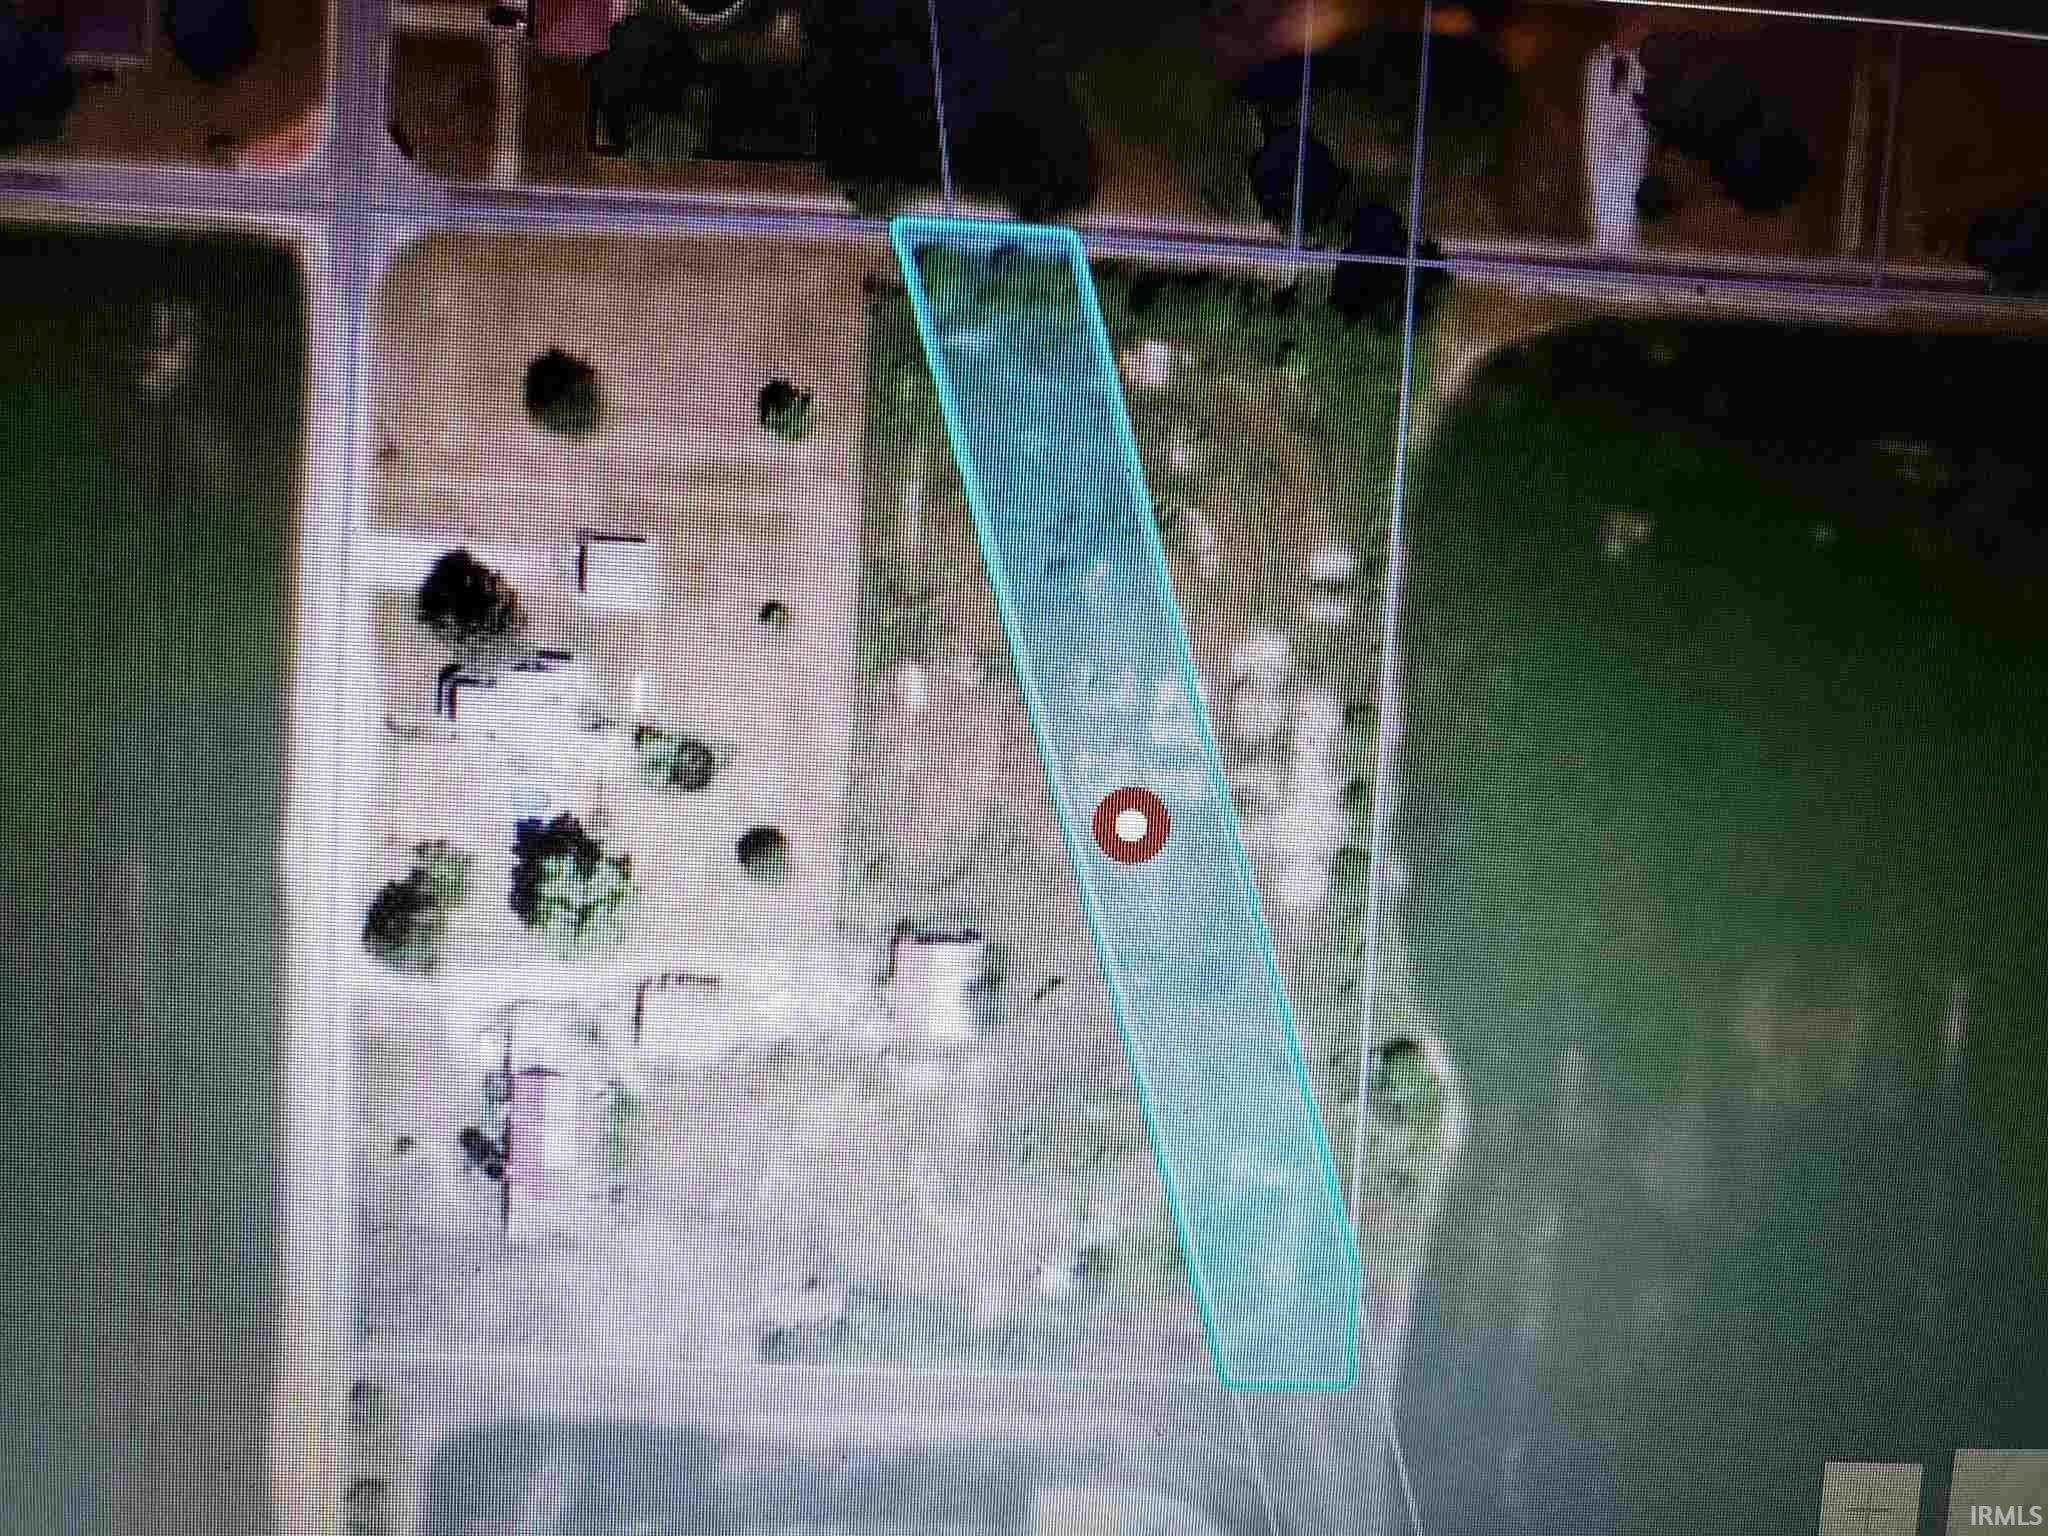 Agricultural Land for Sale at E 950 S Markleville, Indiana 46056 United States